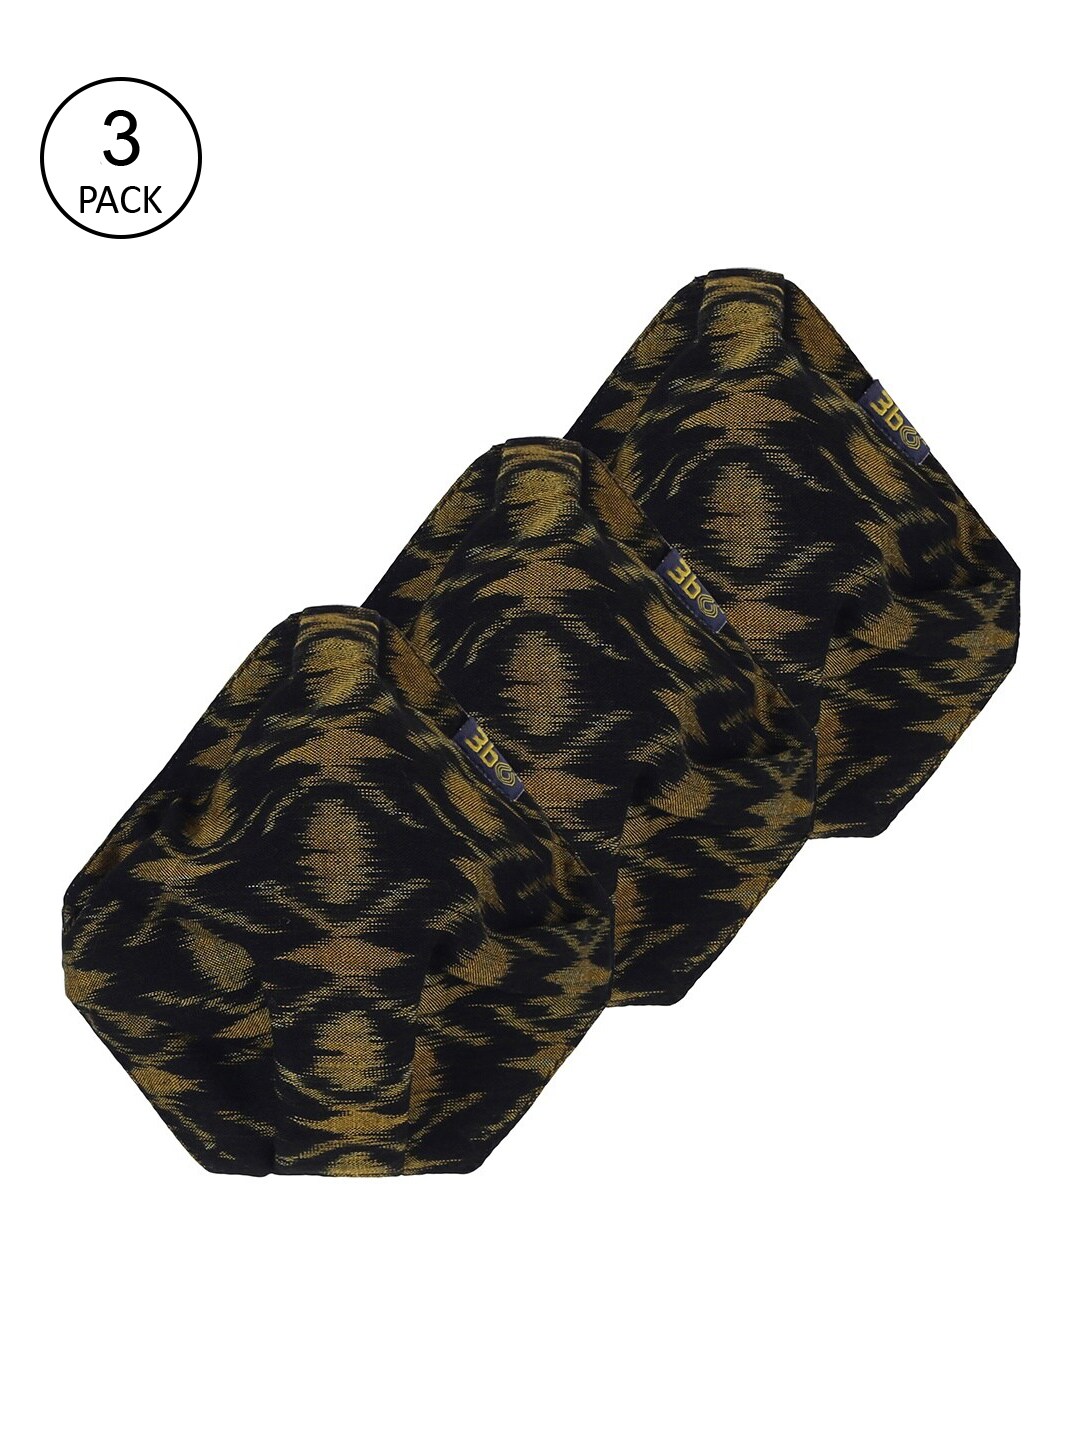 3BO Pack Of 3 Black & Brown Printed 3-Ply 3bO Deltoid Lite Reusable Cotton Cloth Masks Price in India